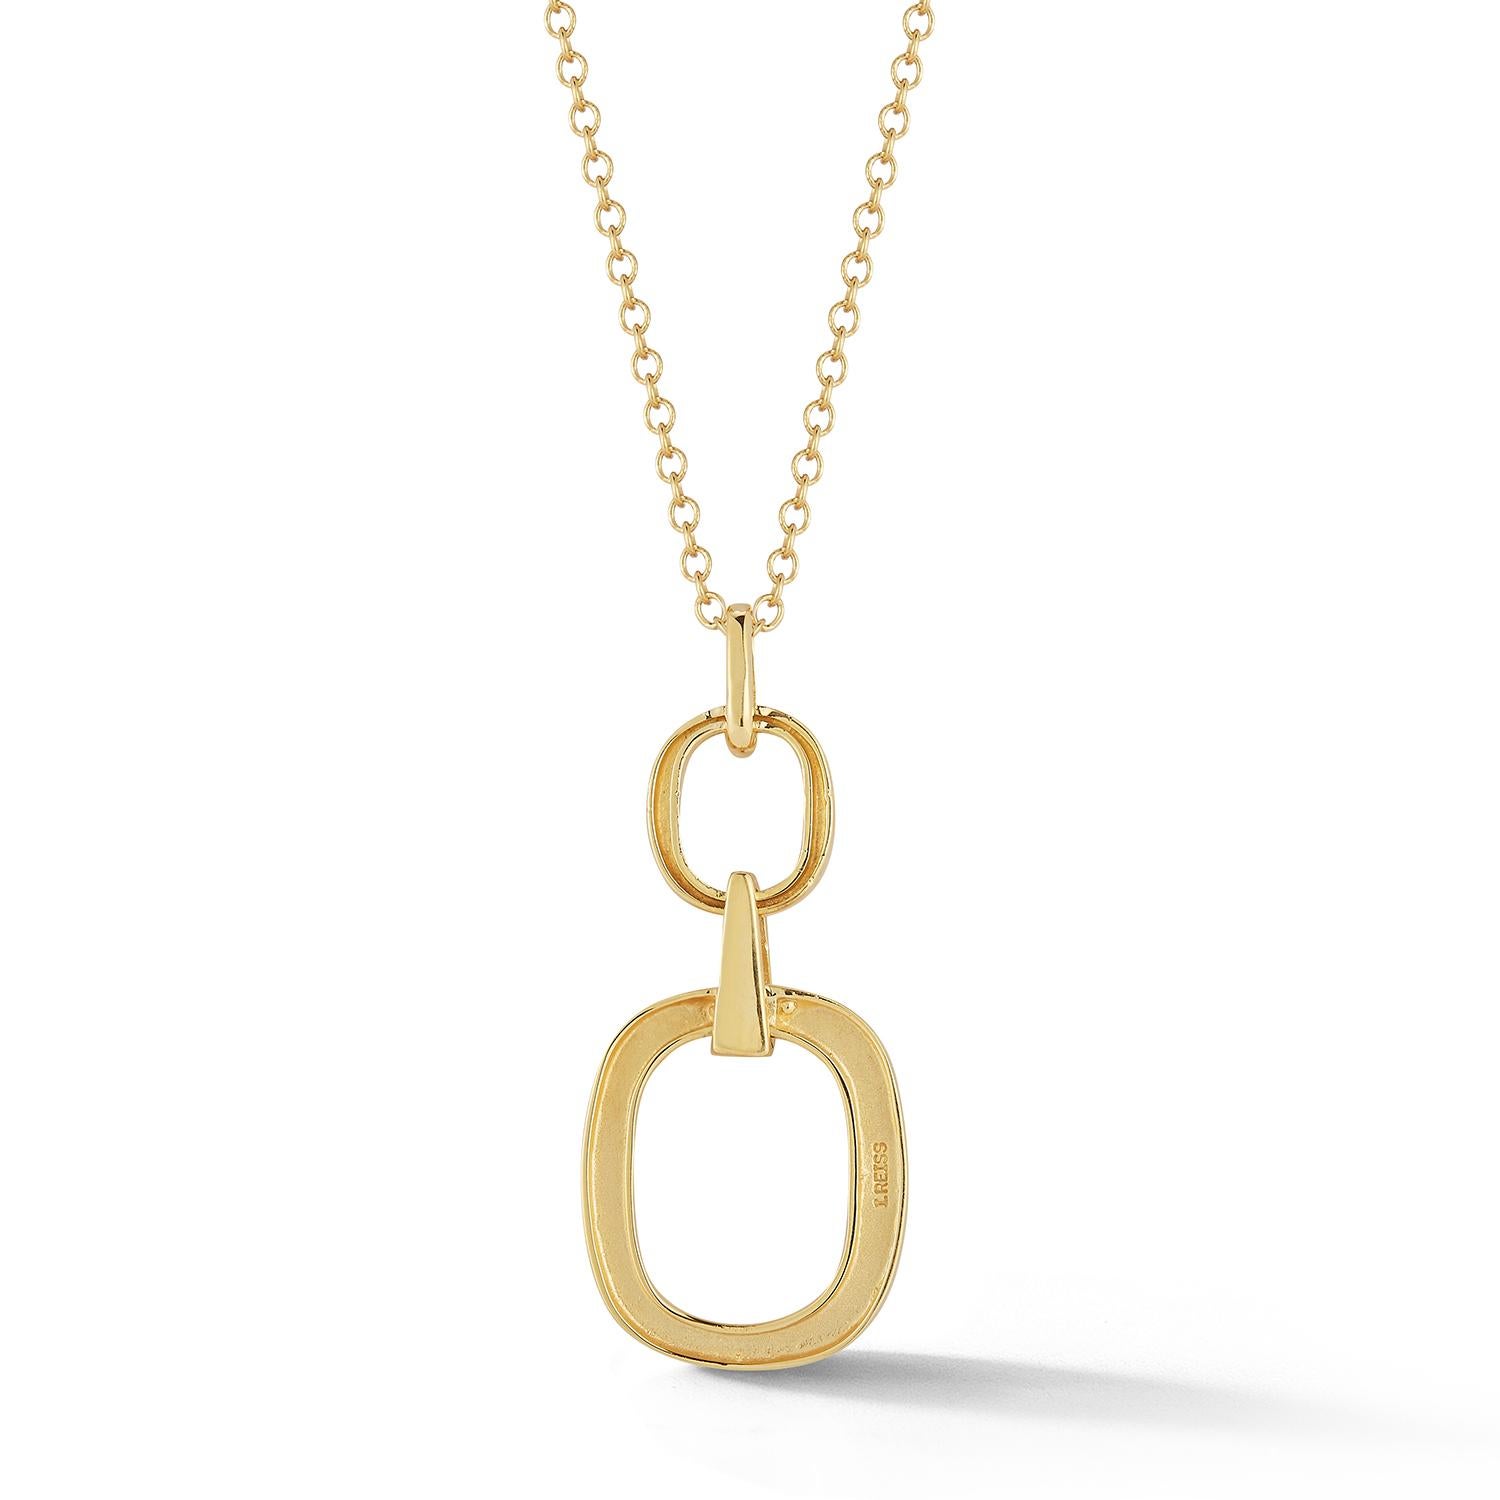 Round Cut Hand-Crafted 14K Yellow Gold High Polish Graduating Open-Form Pendant For Sale